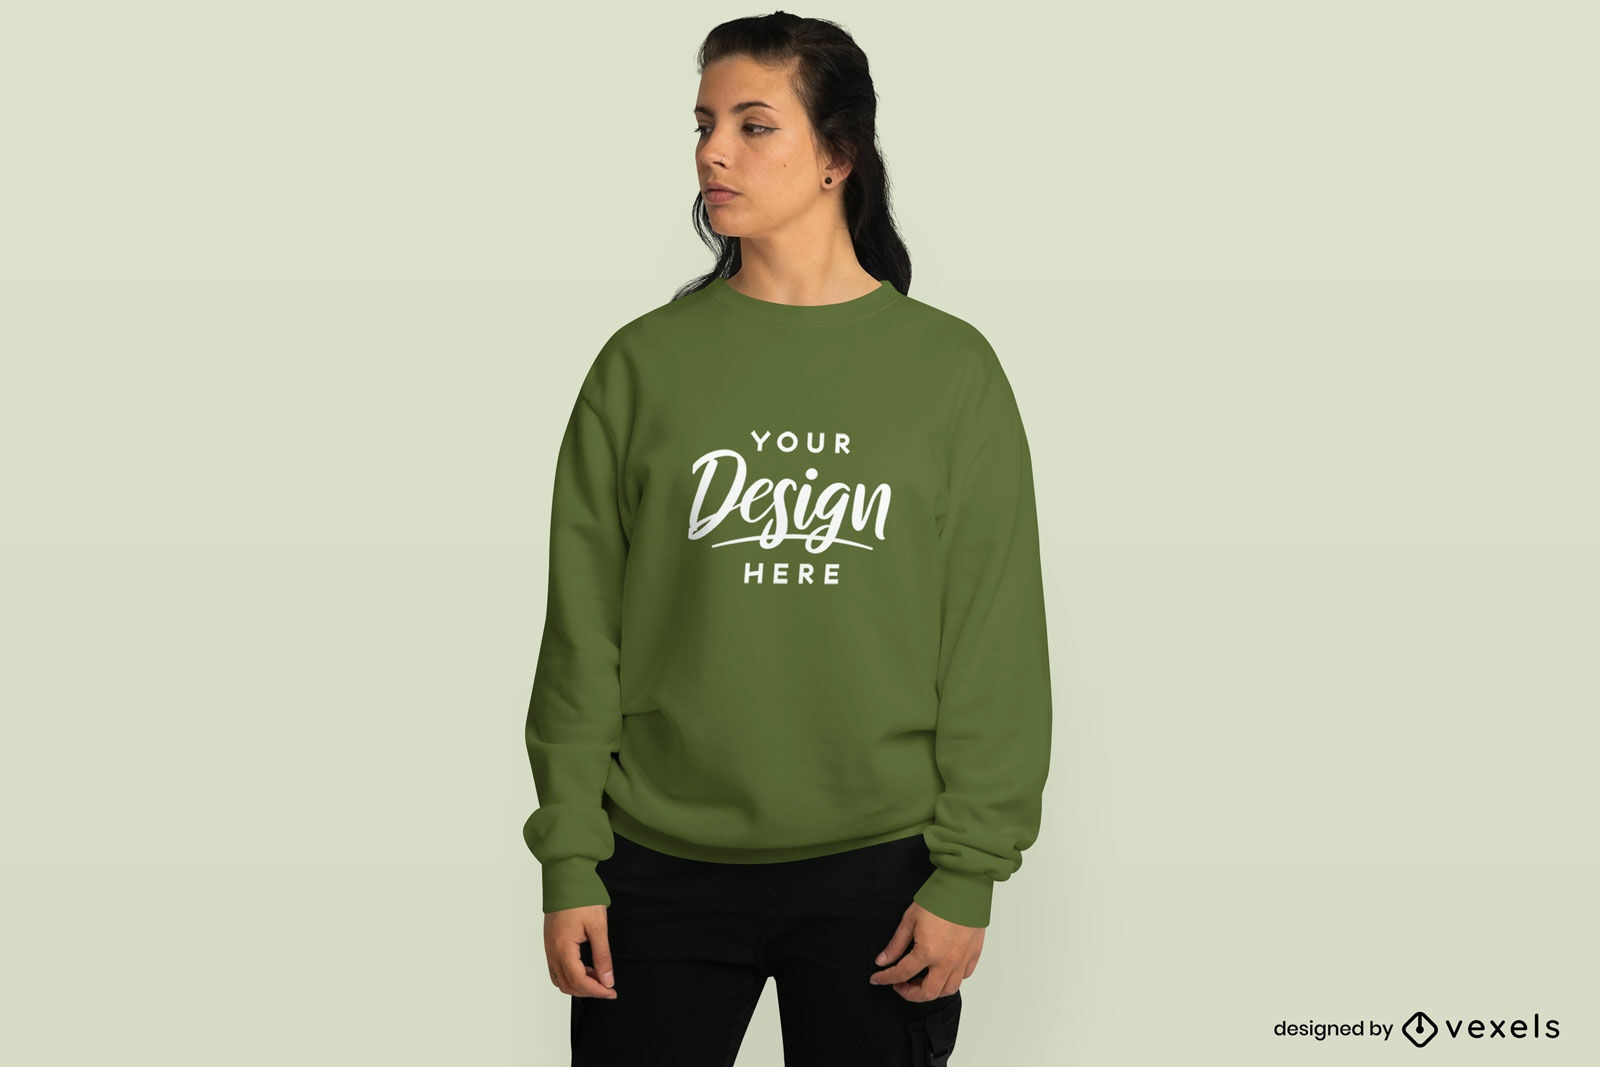 Brunette young woman in hoodie mockup